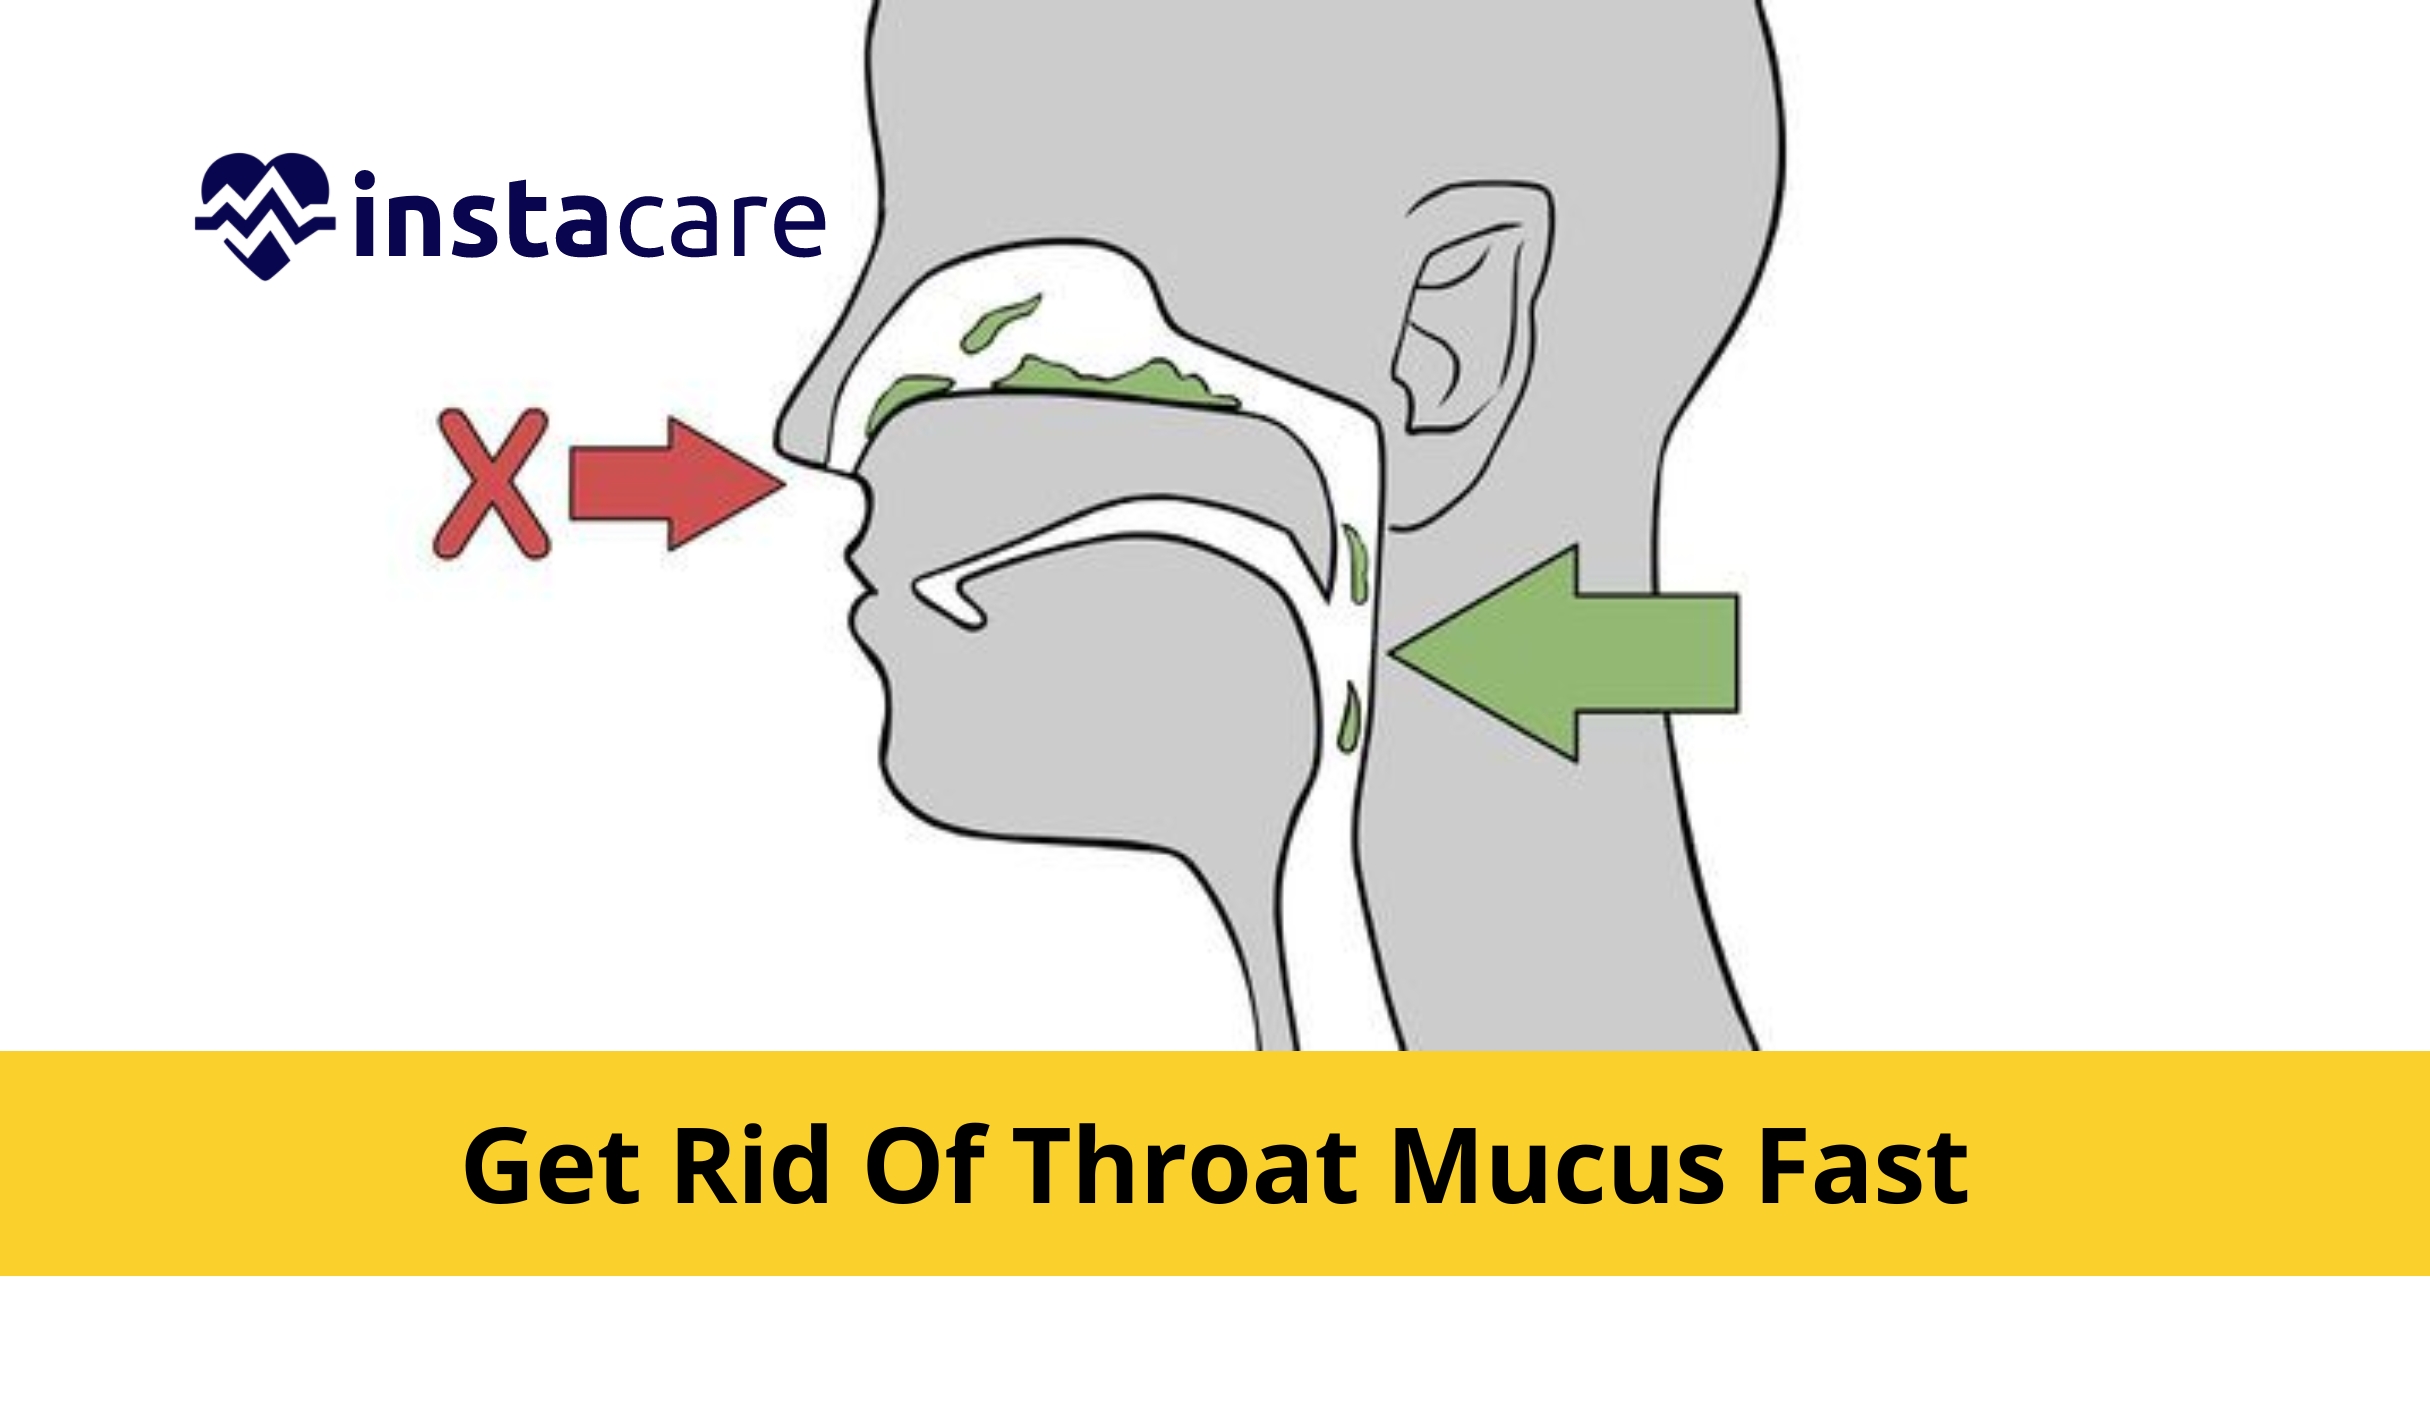 How Can You Get Rid Of Throat Mucus Fast